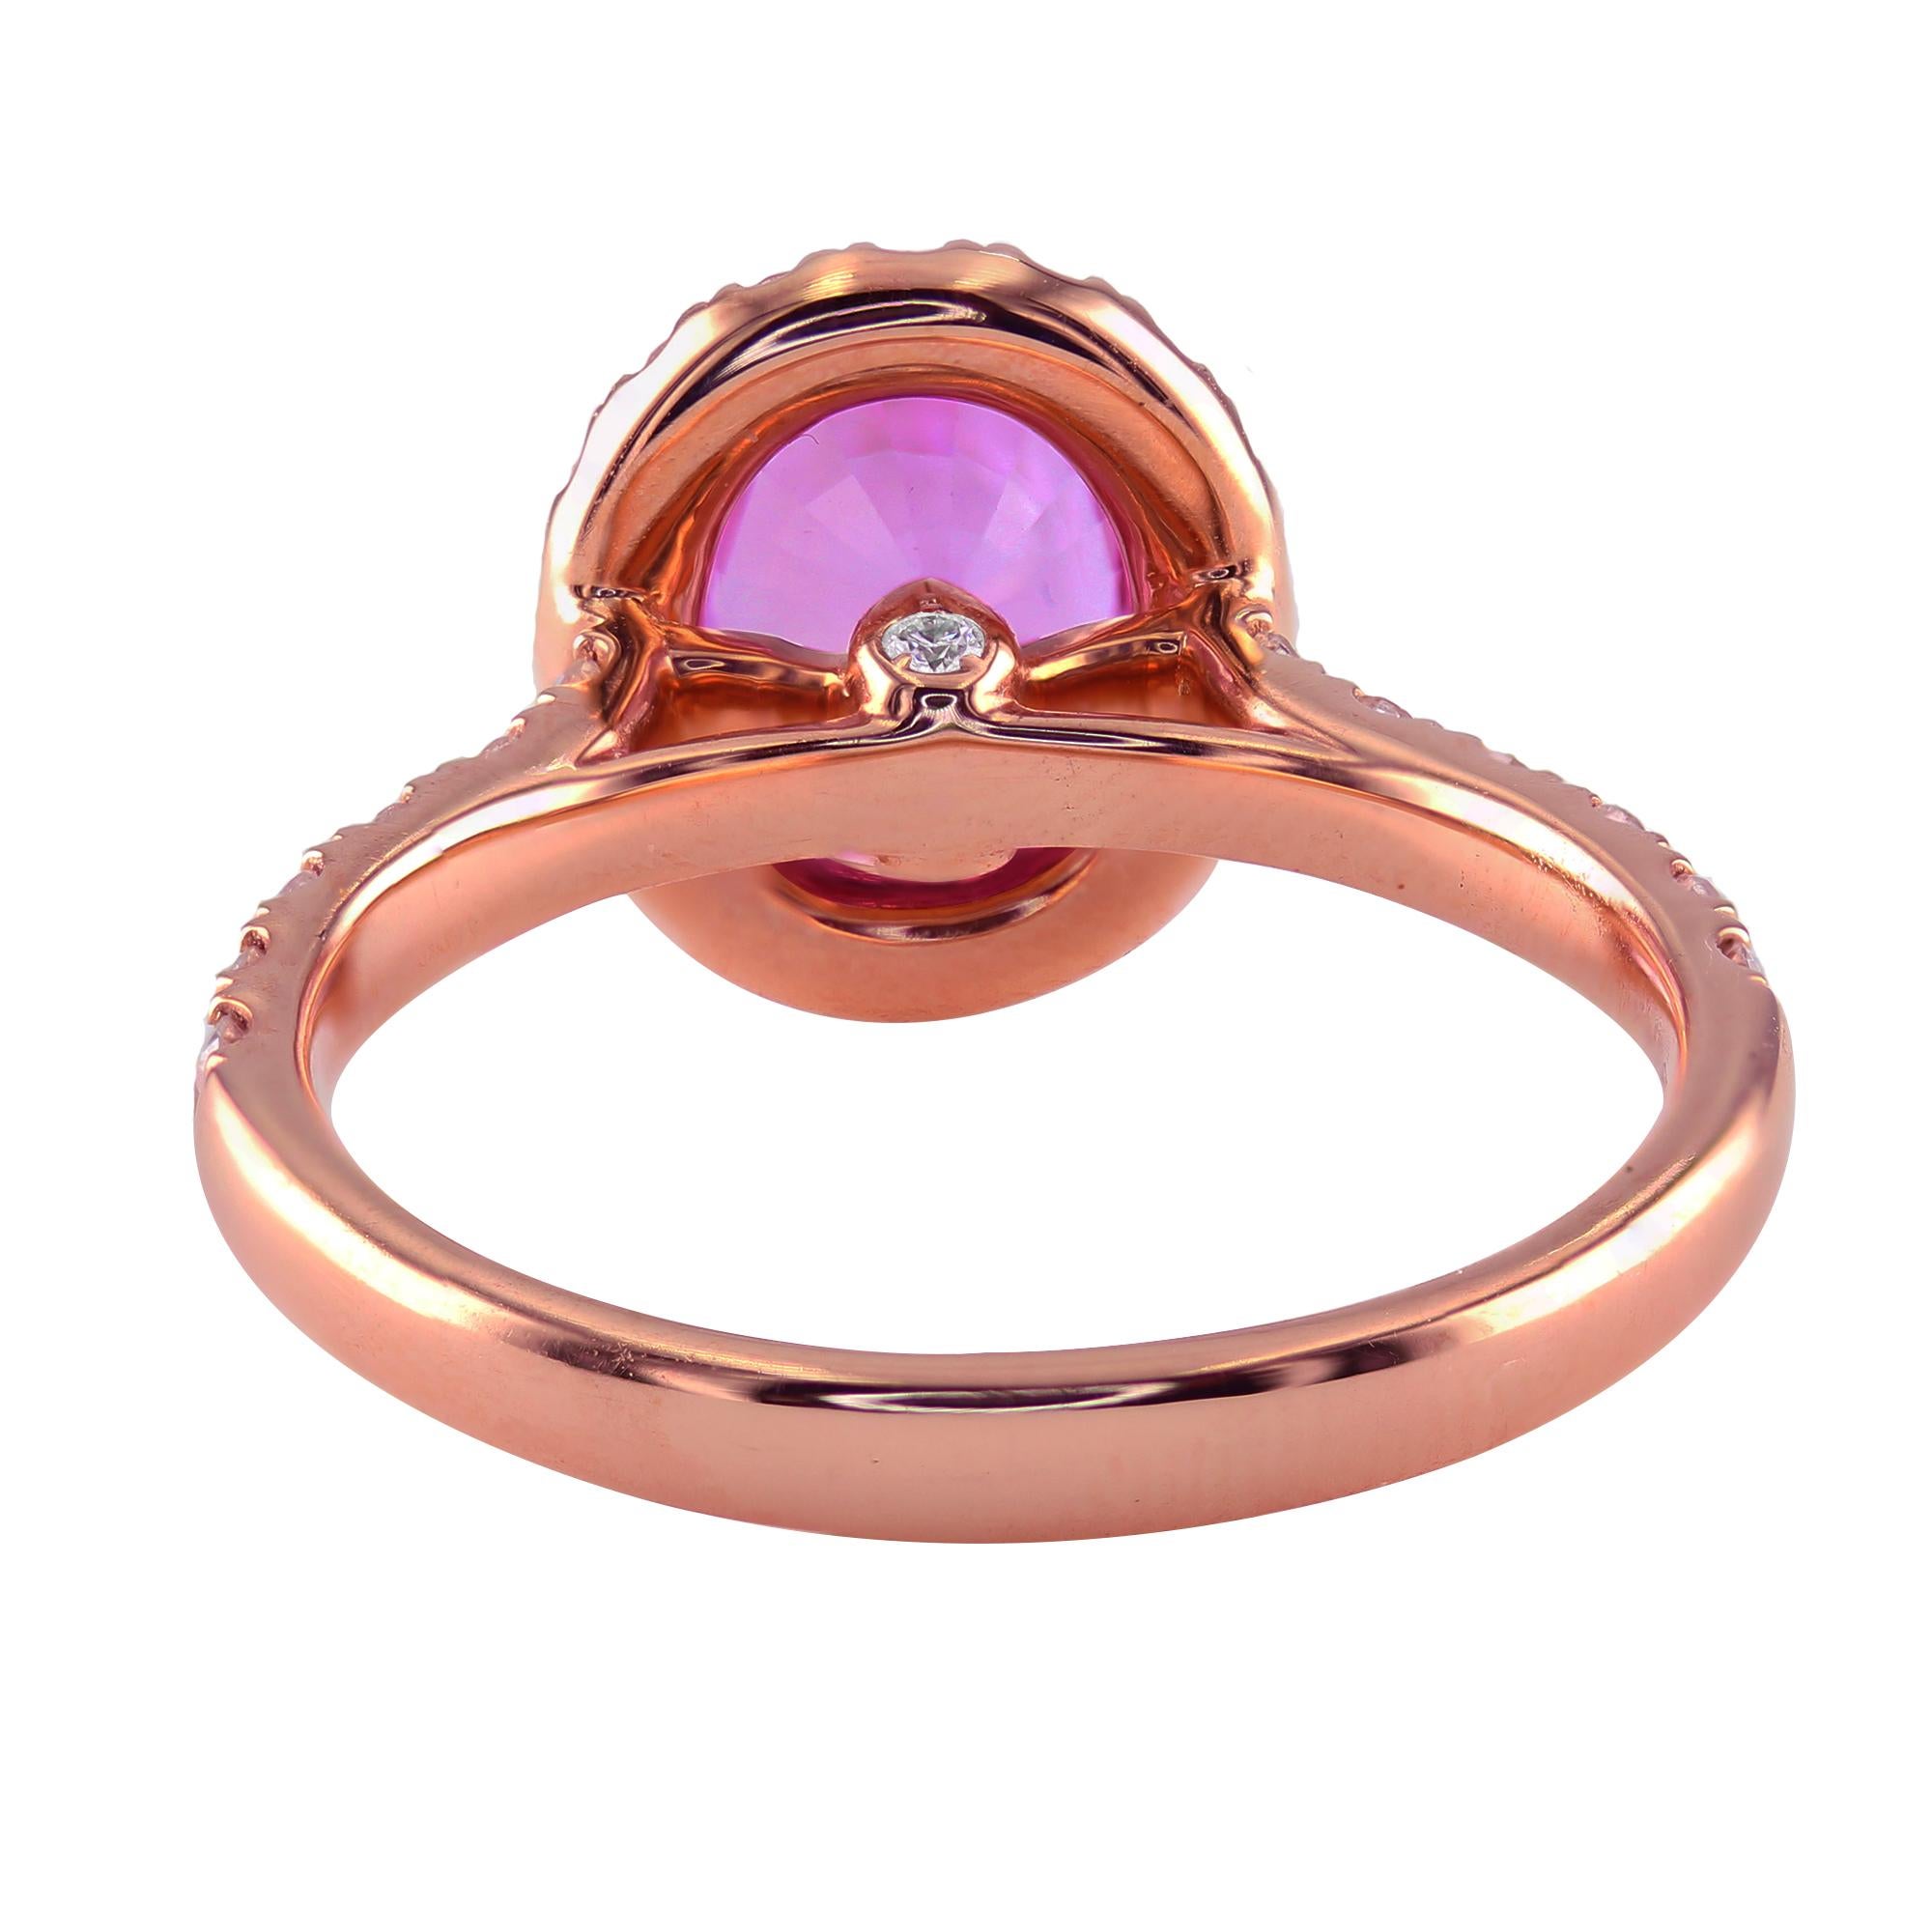 Oval Cut 1.57 Carat Pink Sapphire Cocktail Ring set in 18K Rose Gold For Sale